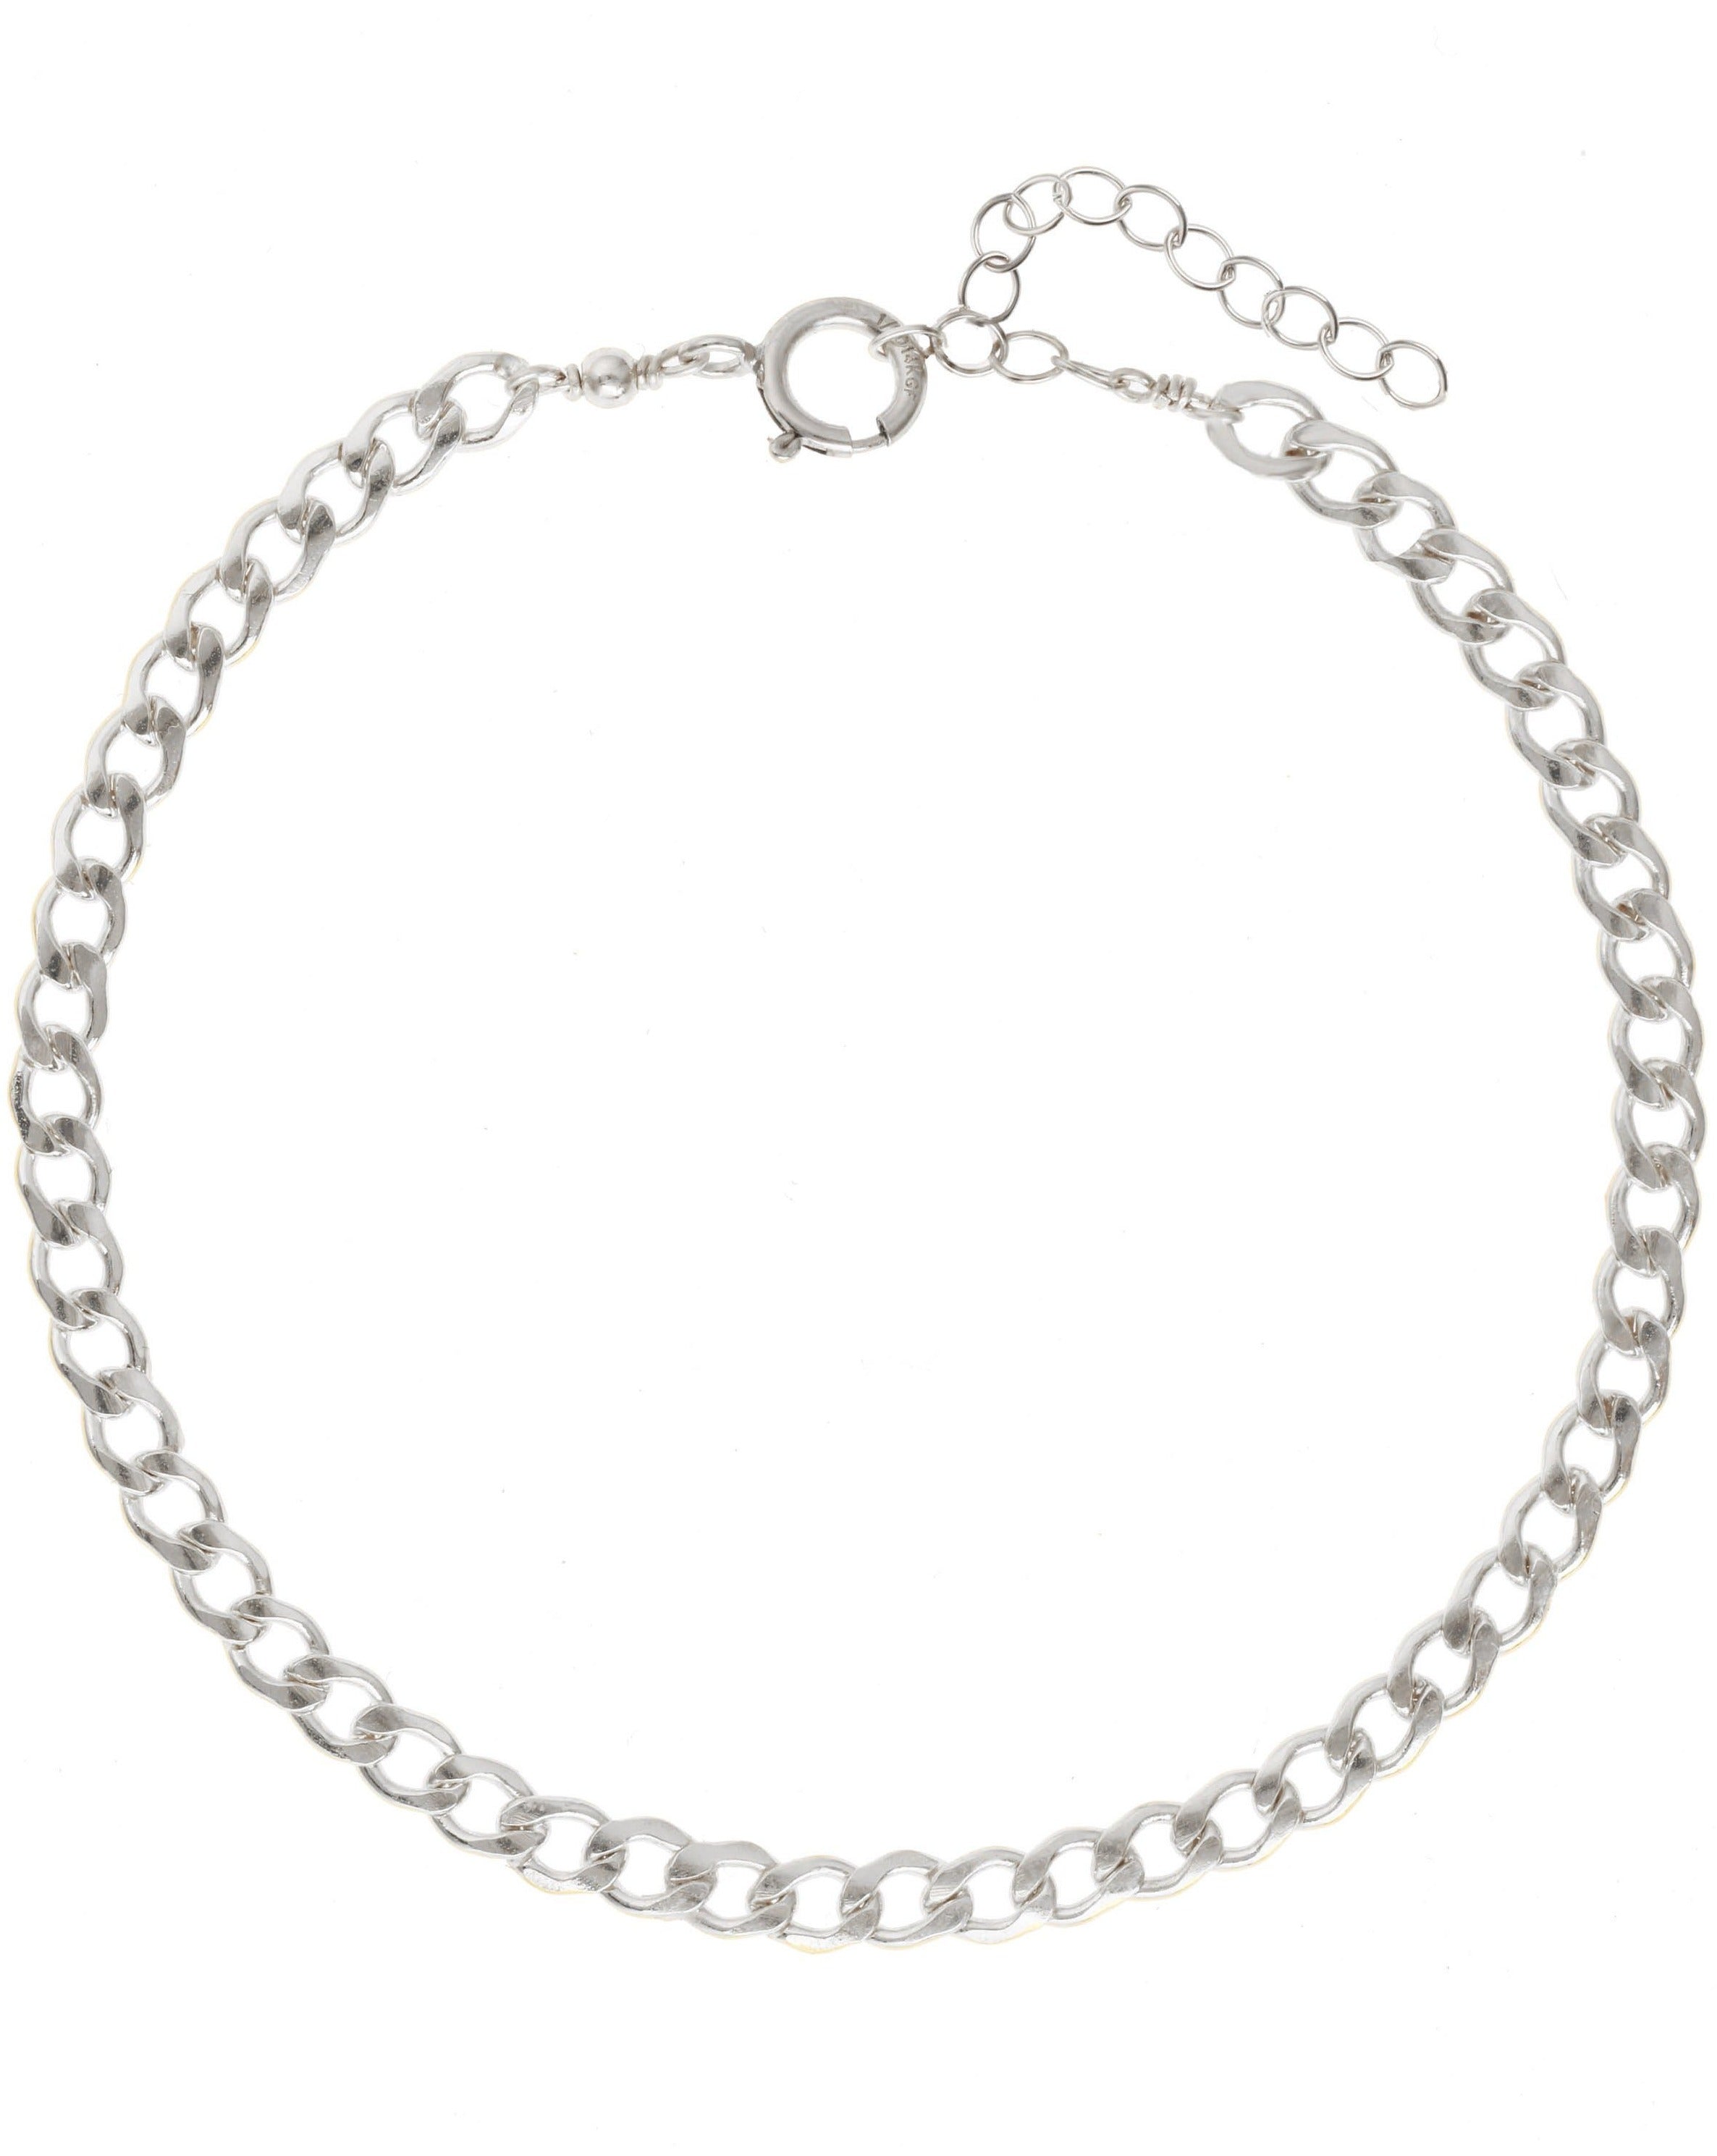 Braided Bracelet by KOZAKH. A 6 to 7 inch adjustable length chain bracelet in Sterling Silver.